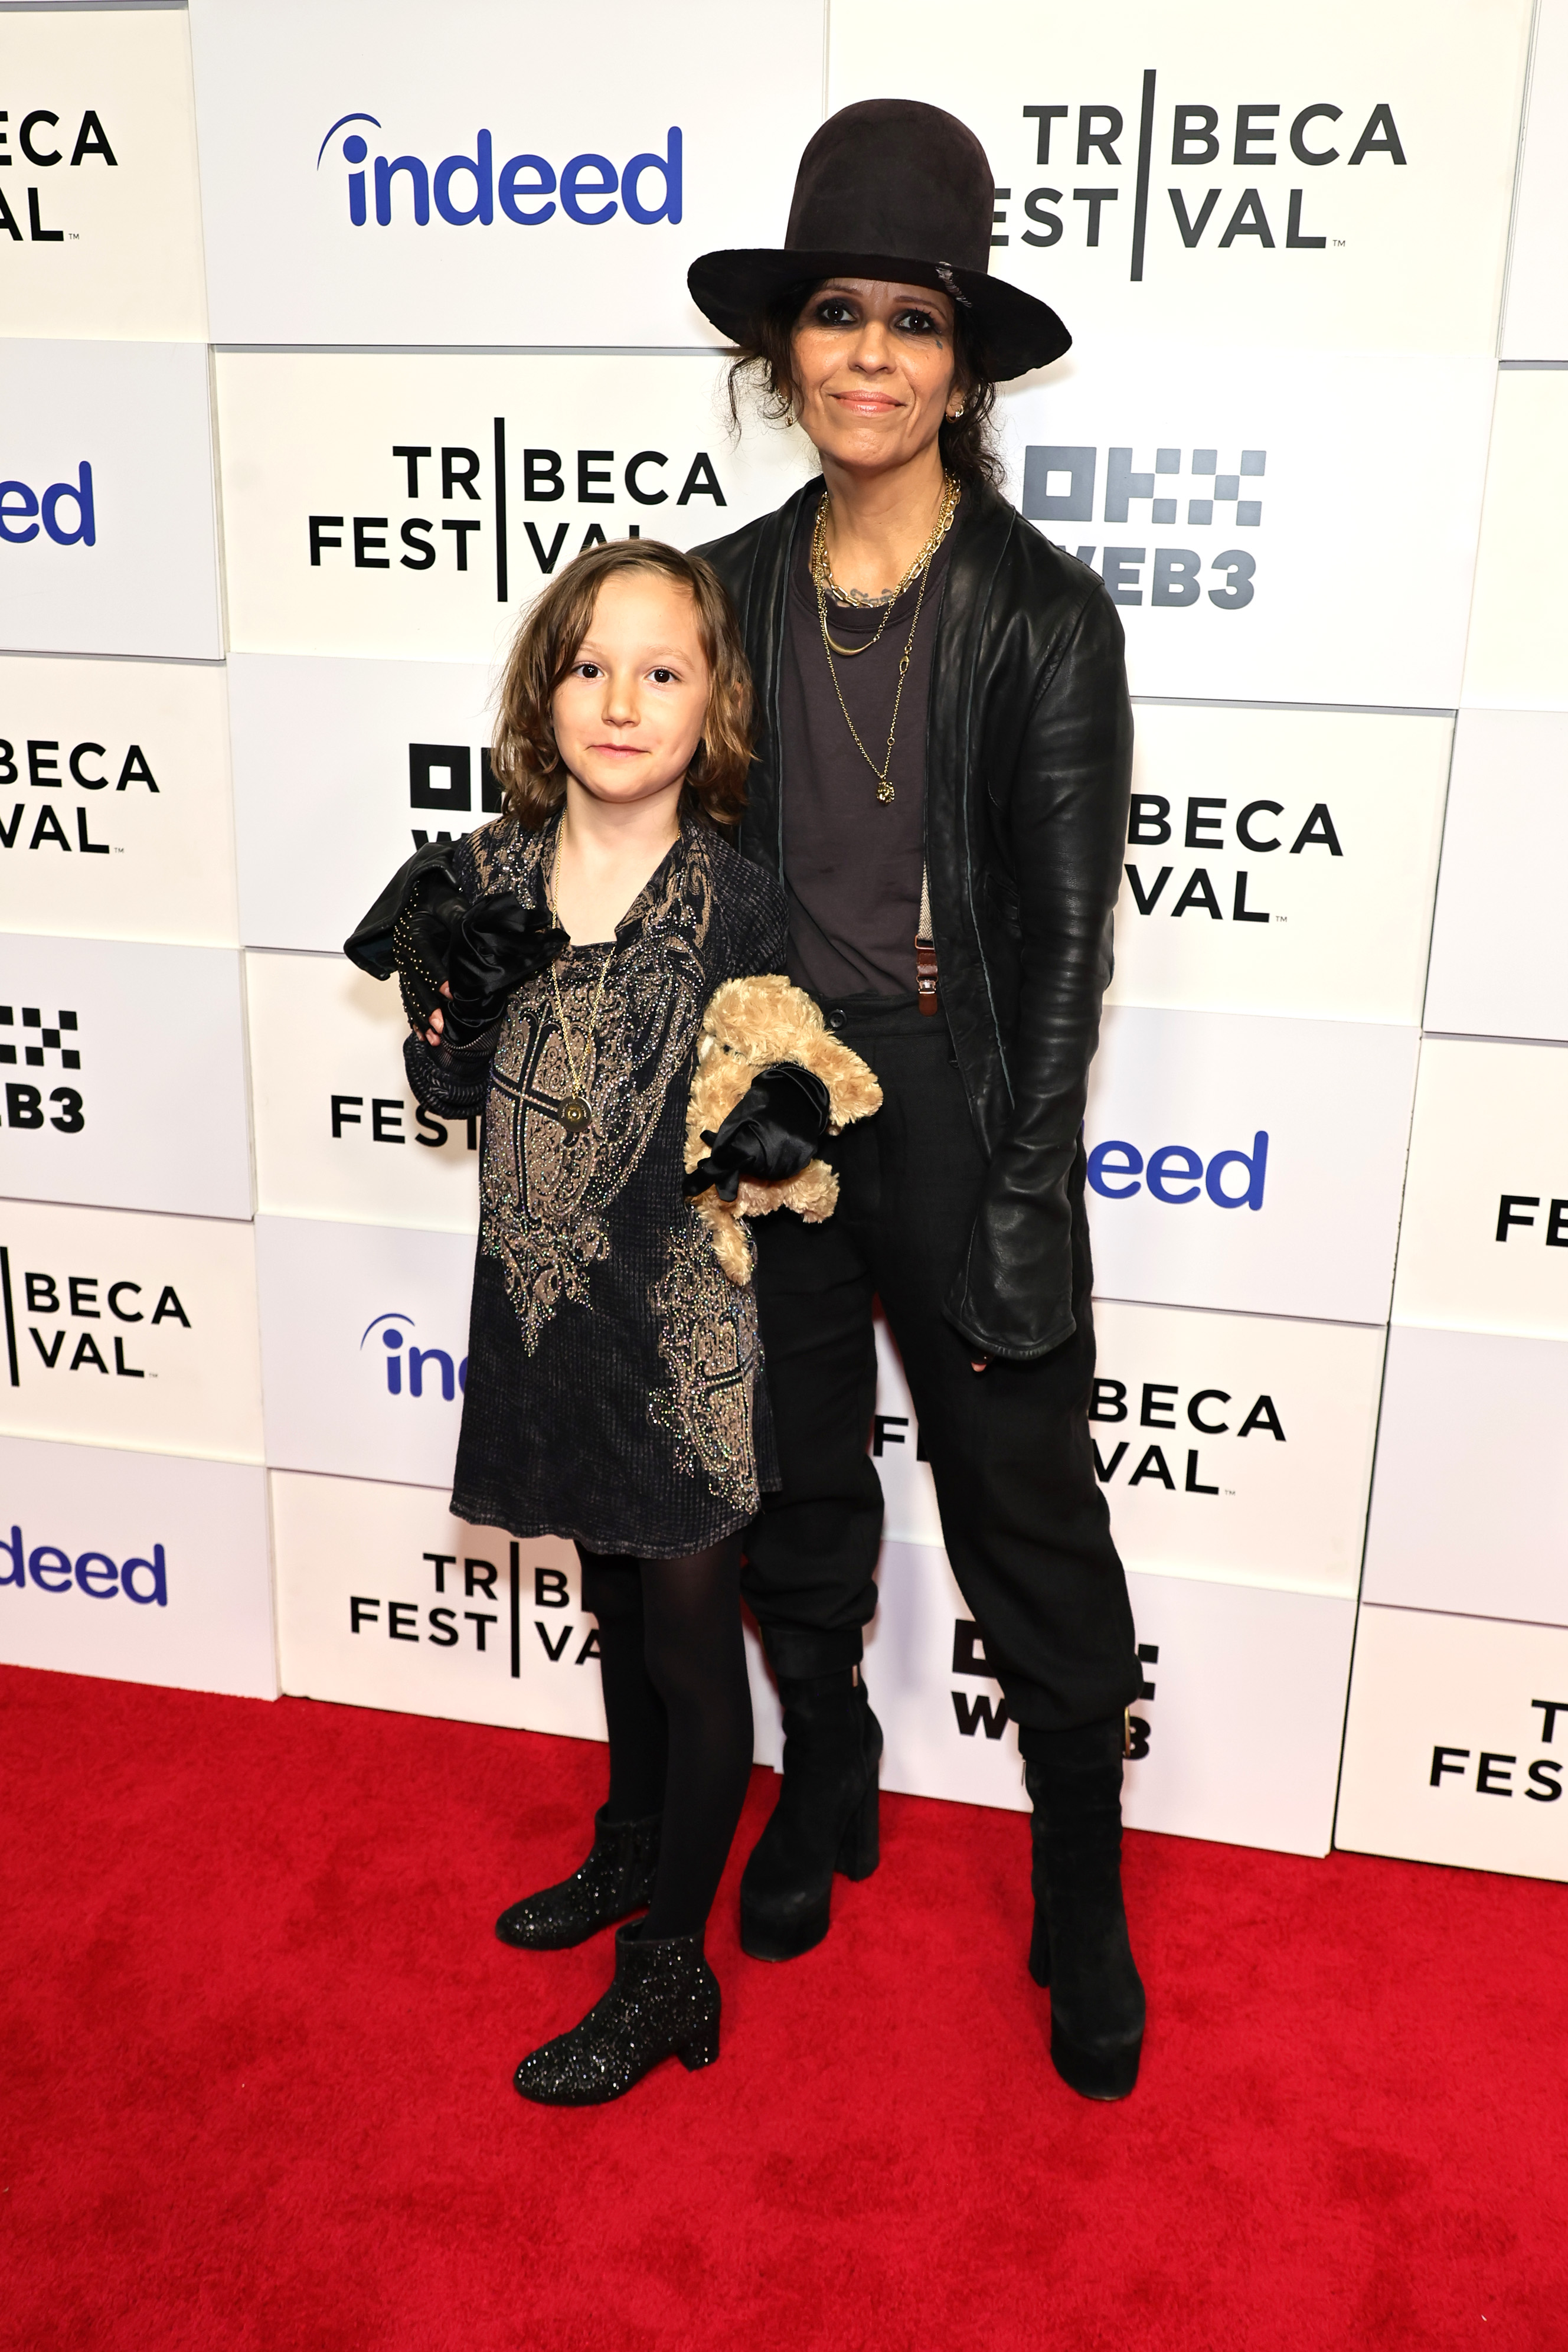 Perry with her daughter Rhodes at the Tribeca Festival